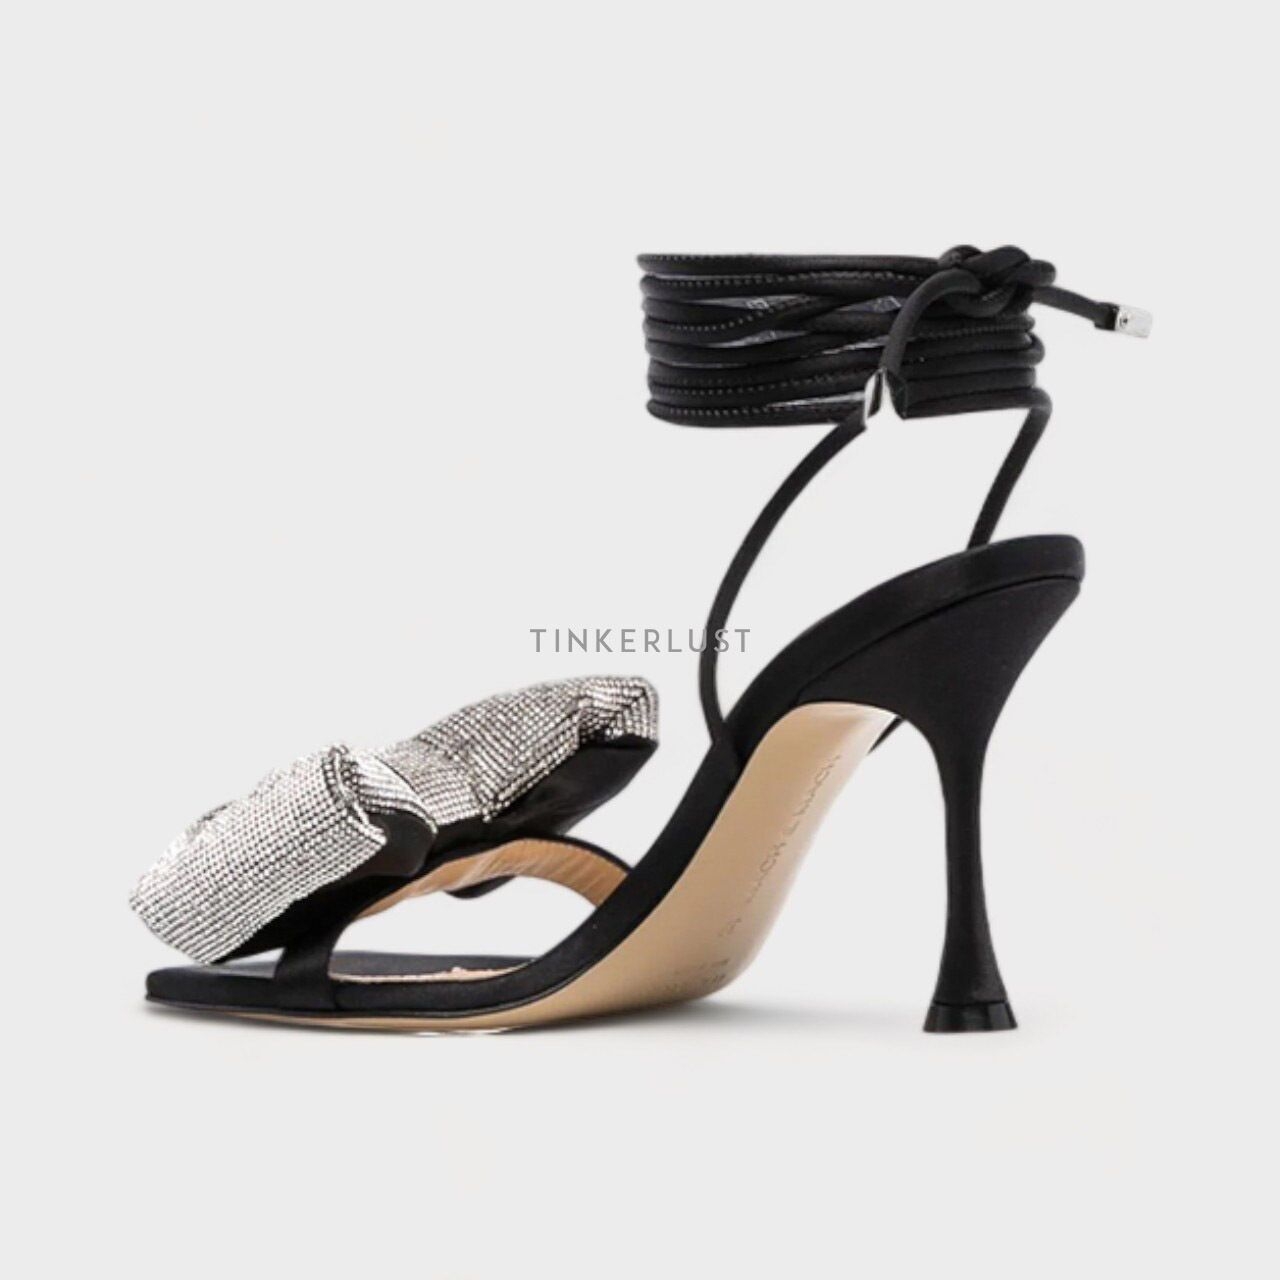 MACH & MACH Nicole Puffed Bow Ankle Tie Sandals 95mm in Black